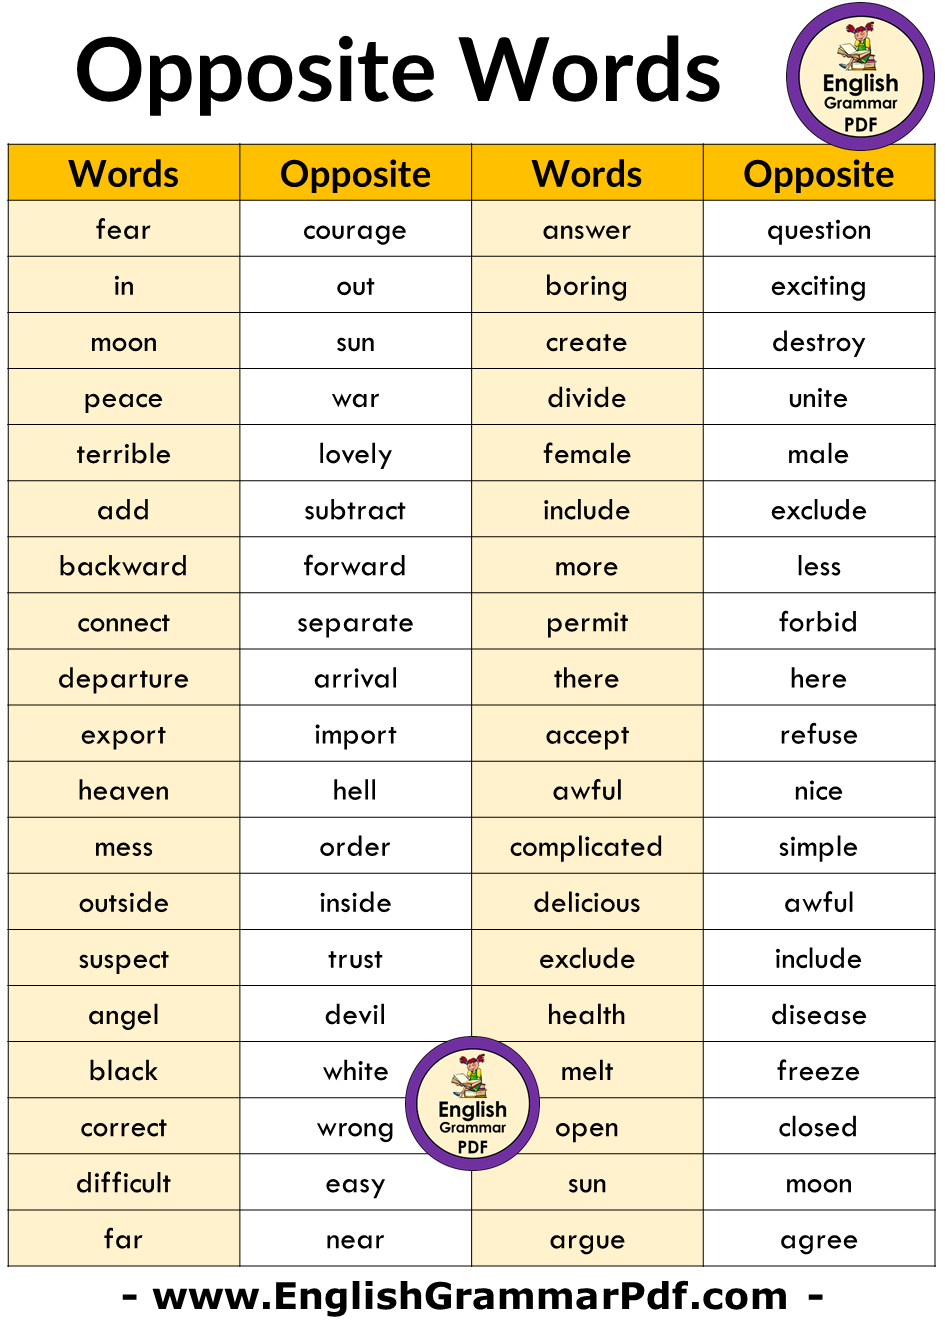 Opposite Words List in English